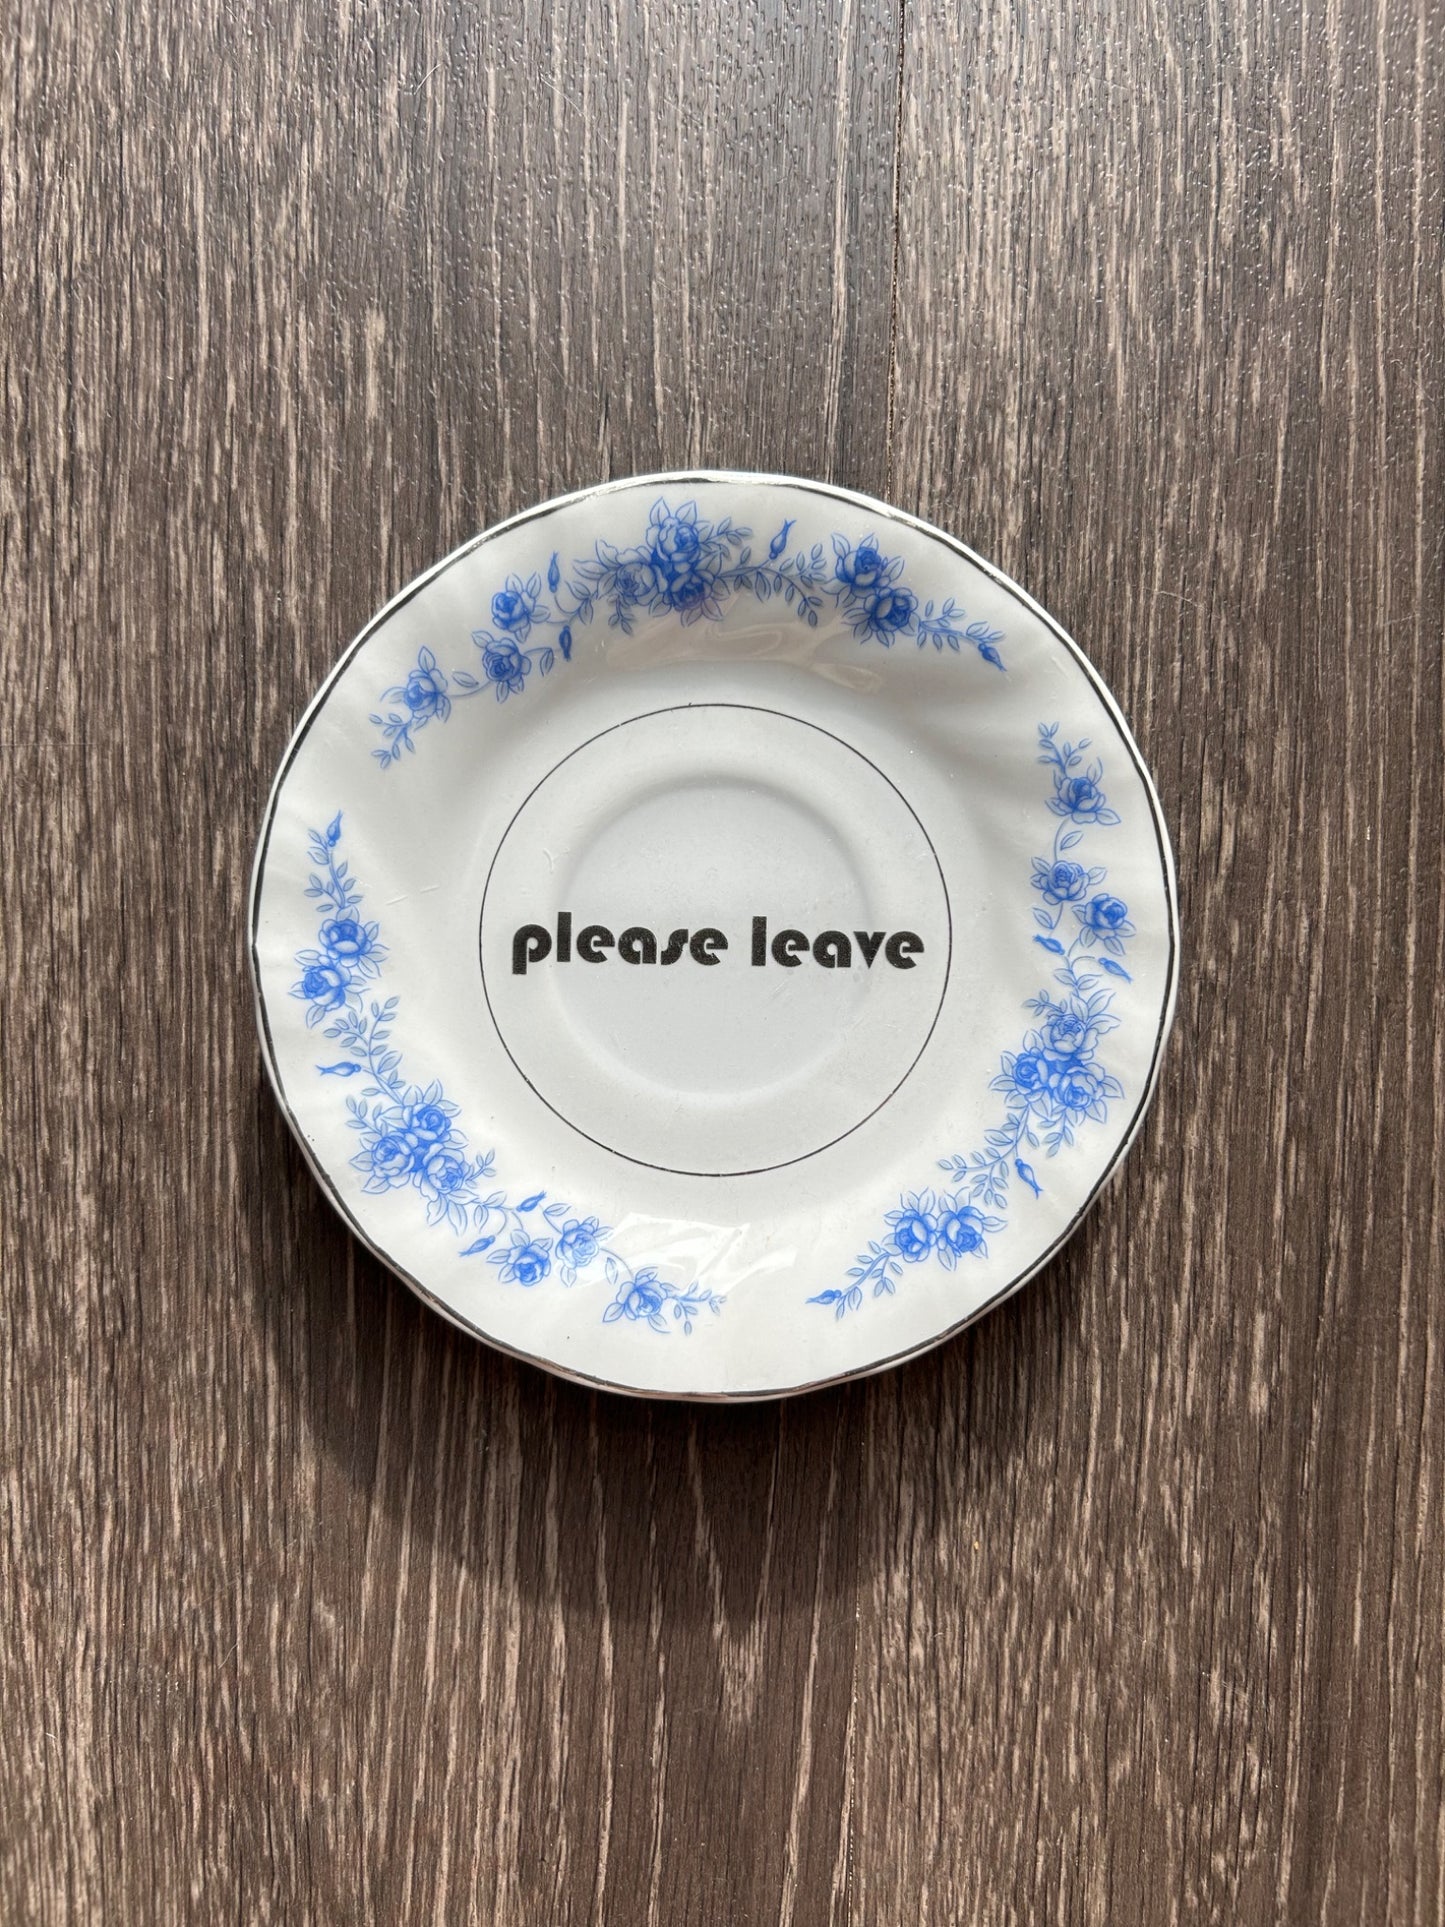 Small & Medium Sassy Plates by The Porcelain Pigeon - 19